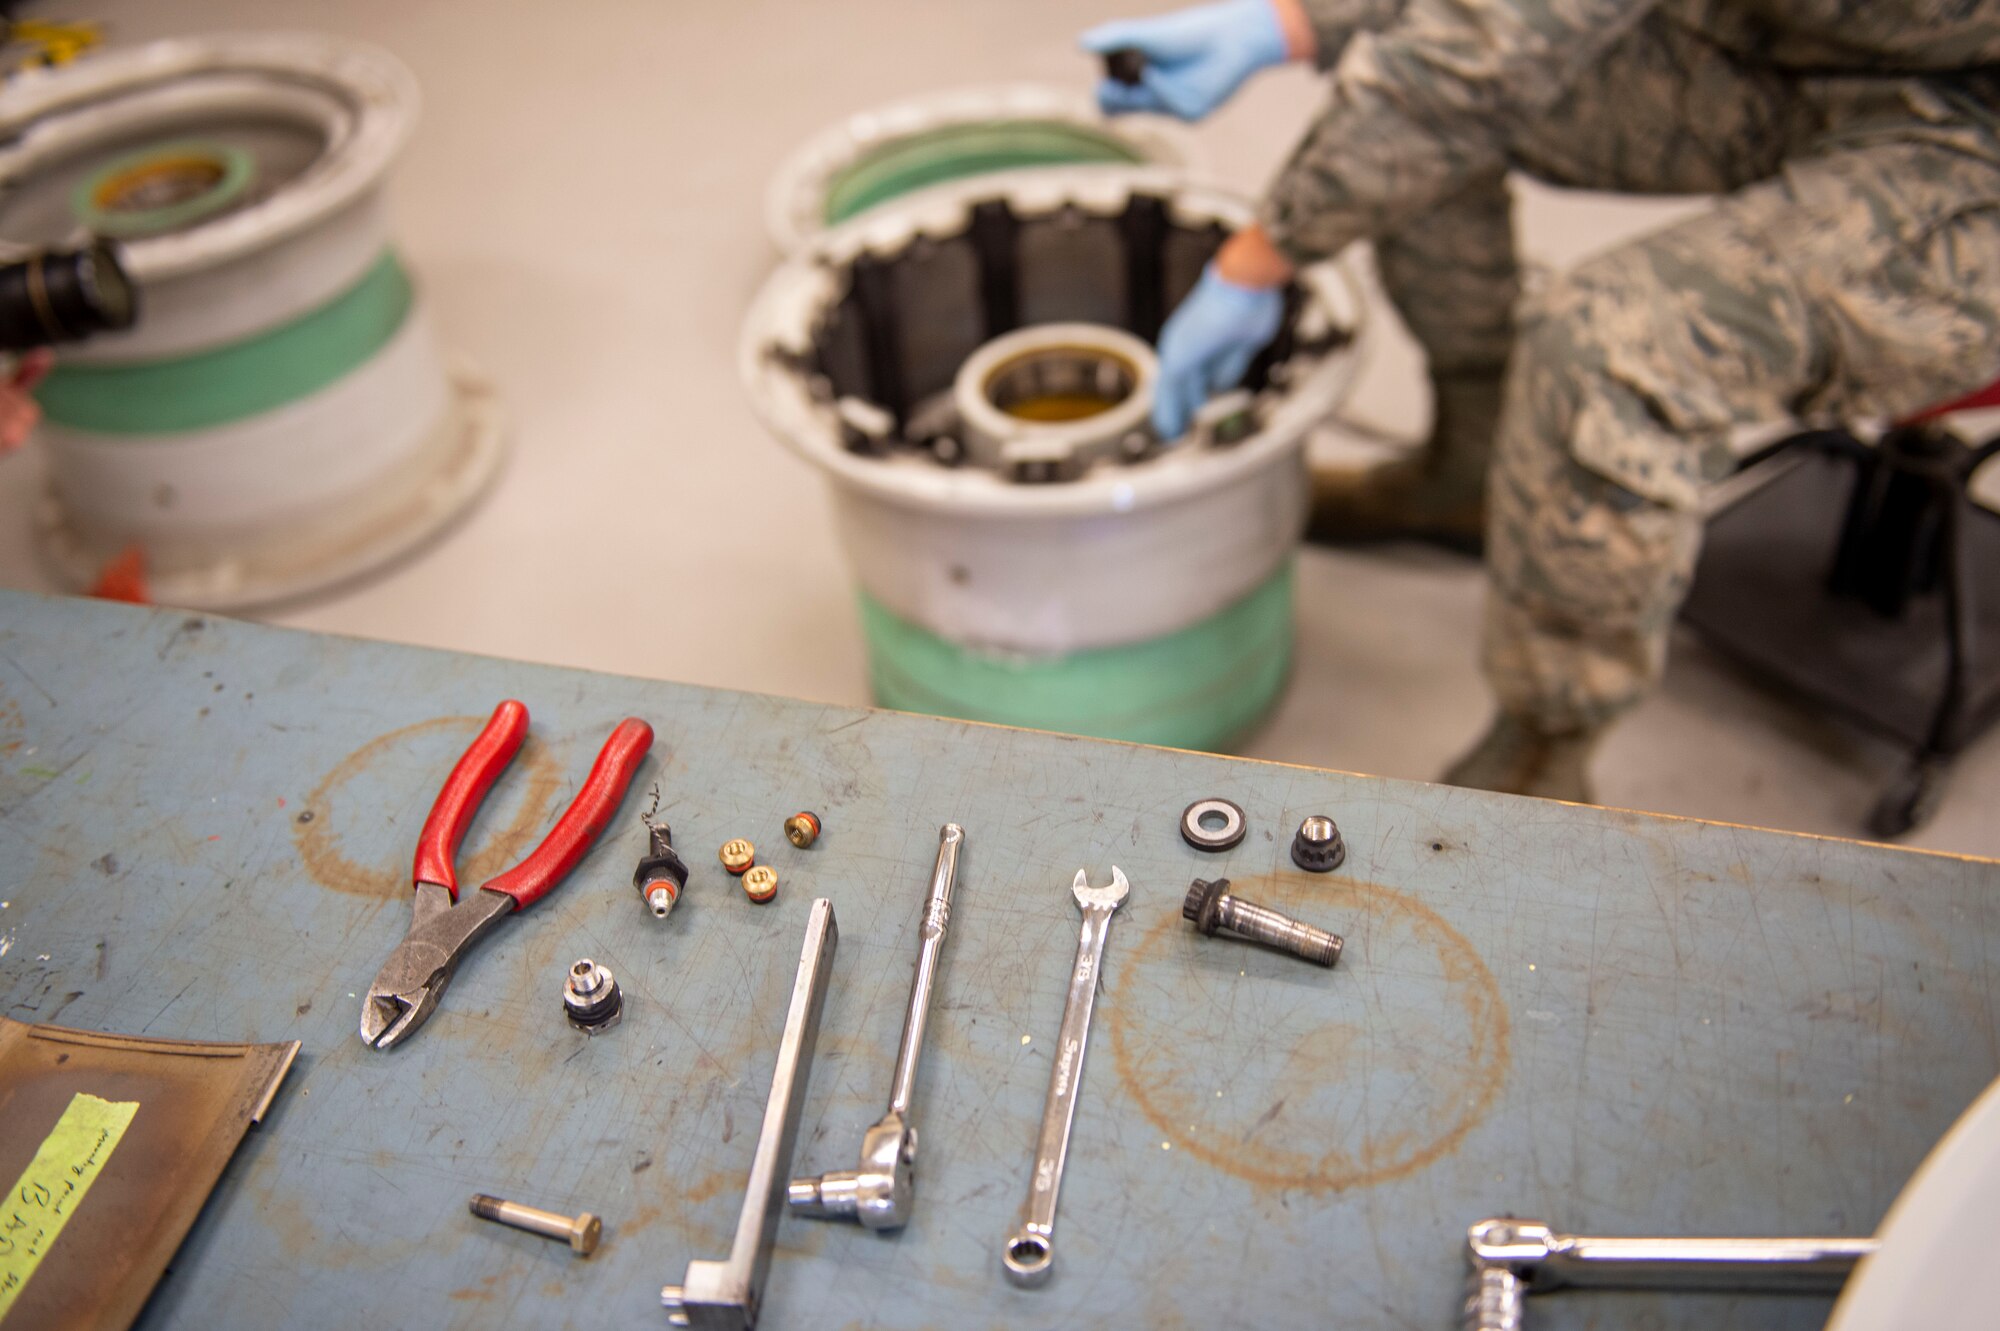 U.S. Air Force Staff Sgt. Logan Konigson, repair and reclamation specialist, 133rd Maintenance Squadron, disassembles a wheel assembly for refurbishment in St. Paul, Minn., Aug. 21, 2020.